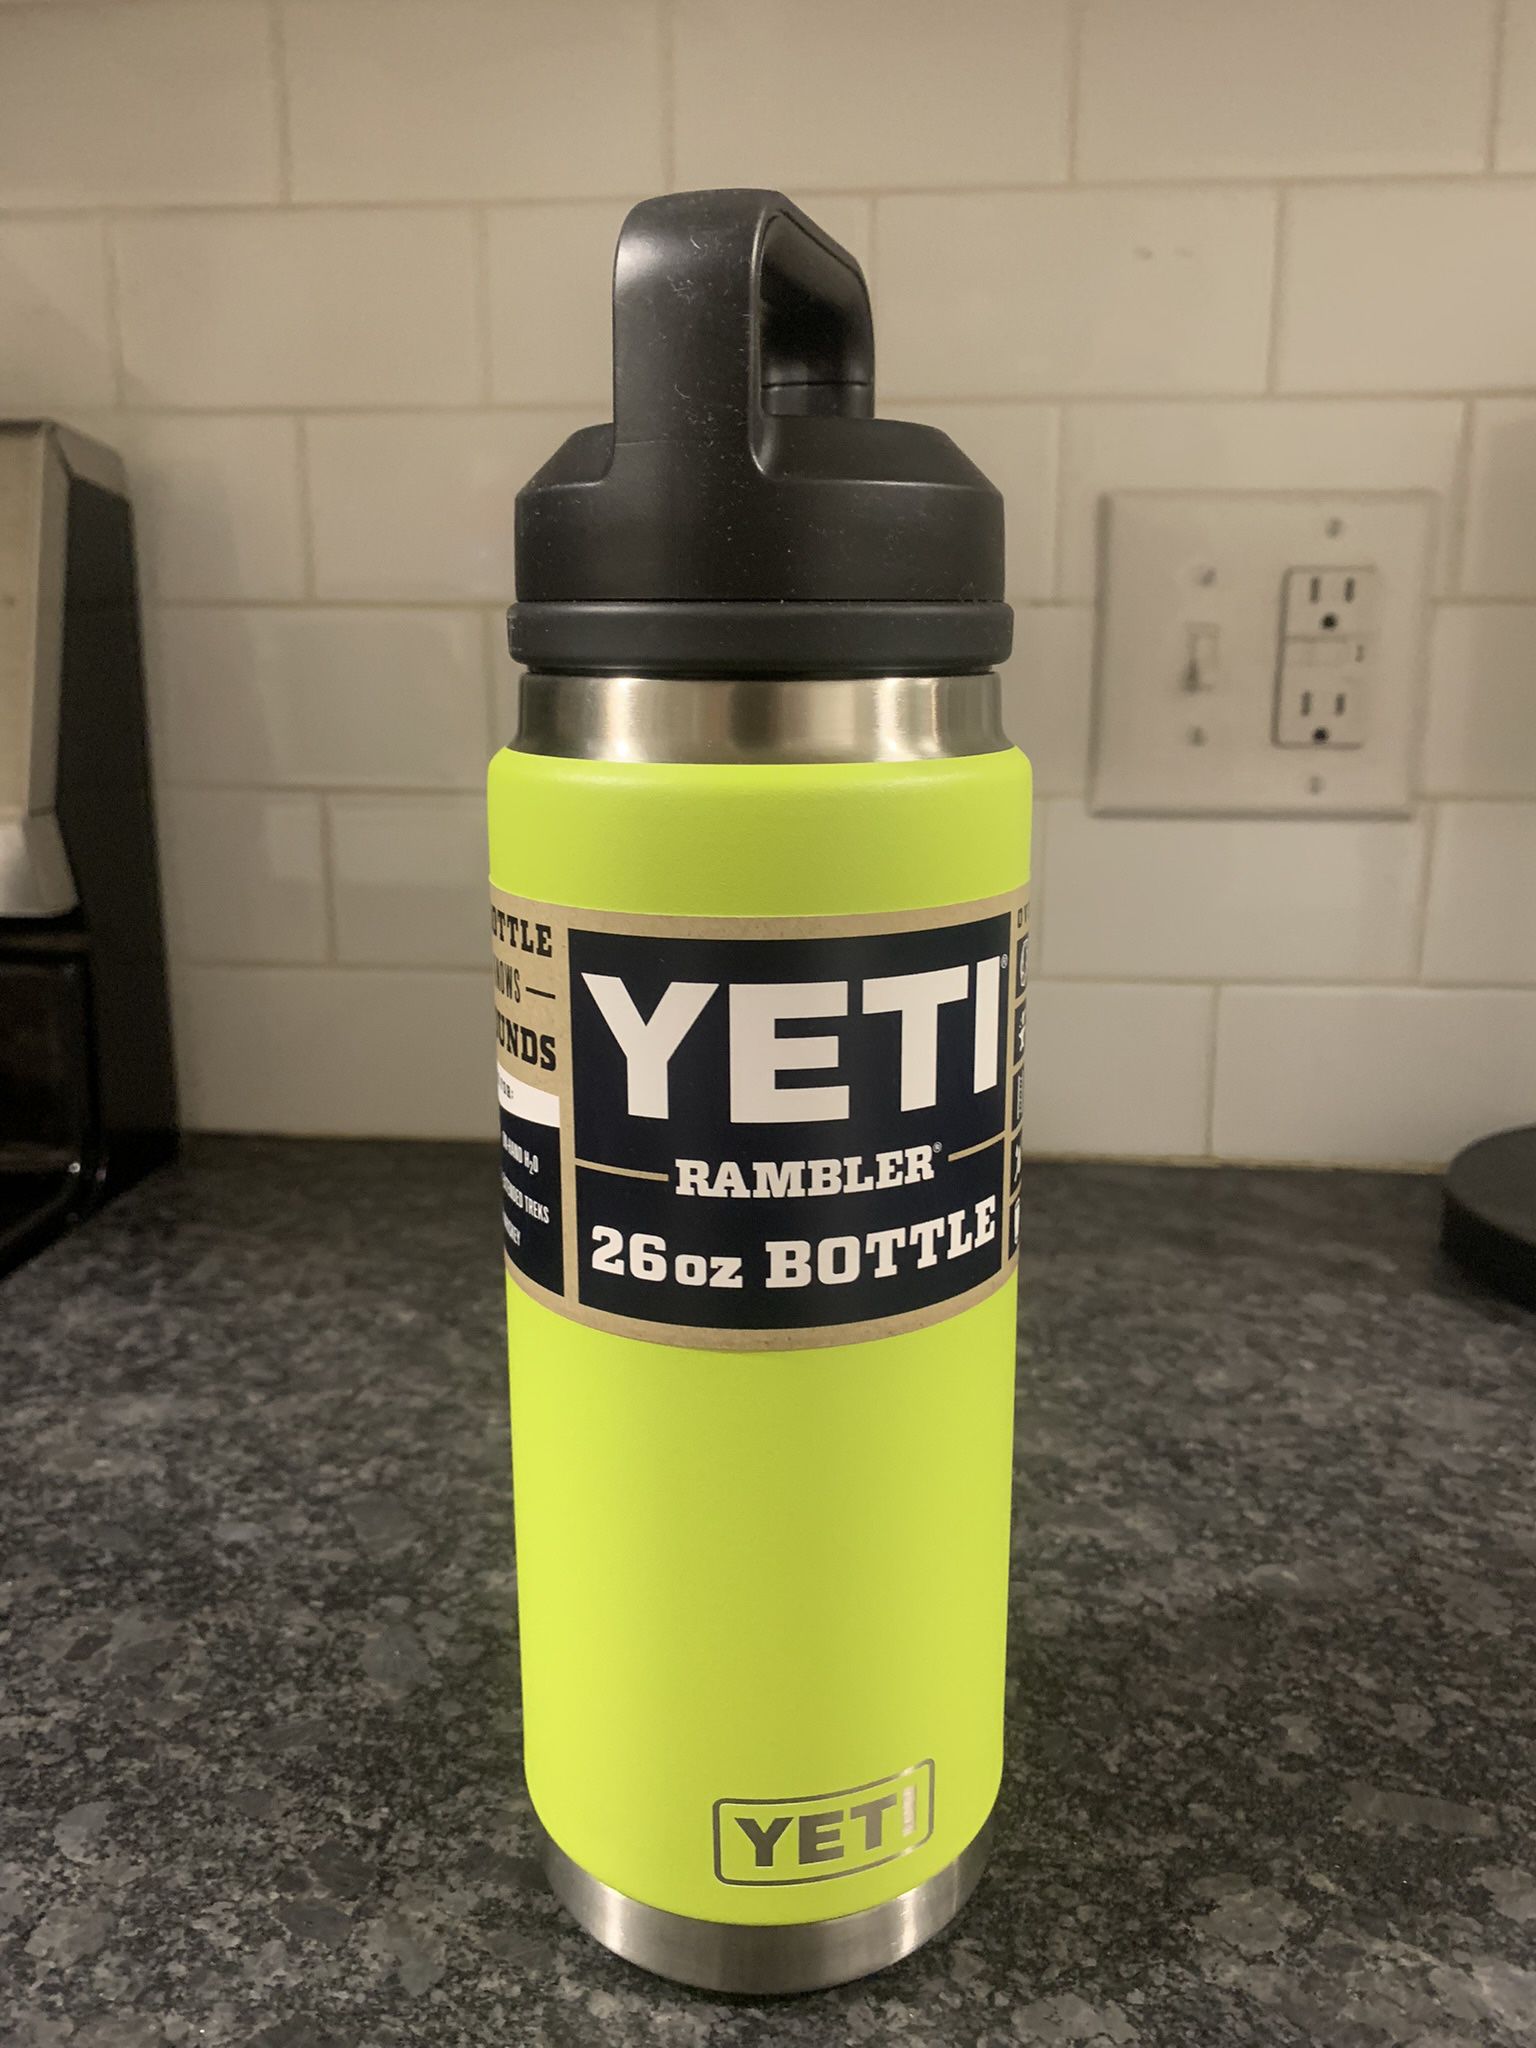 NEW Yeti Rambler 26 oz Bottle Chartreuse with Chug Cap Pair!! Discontinued